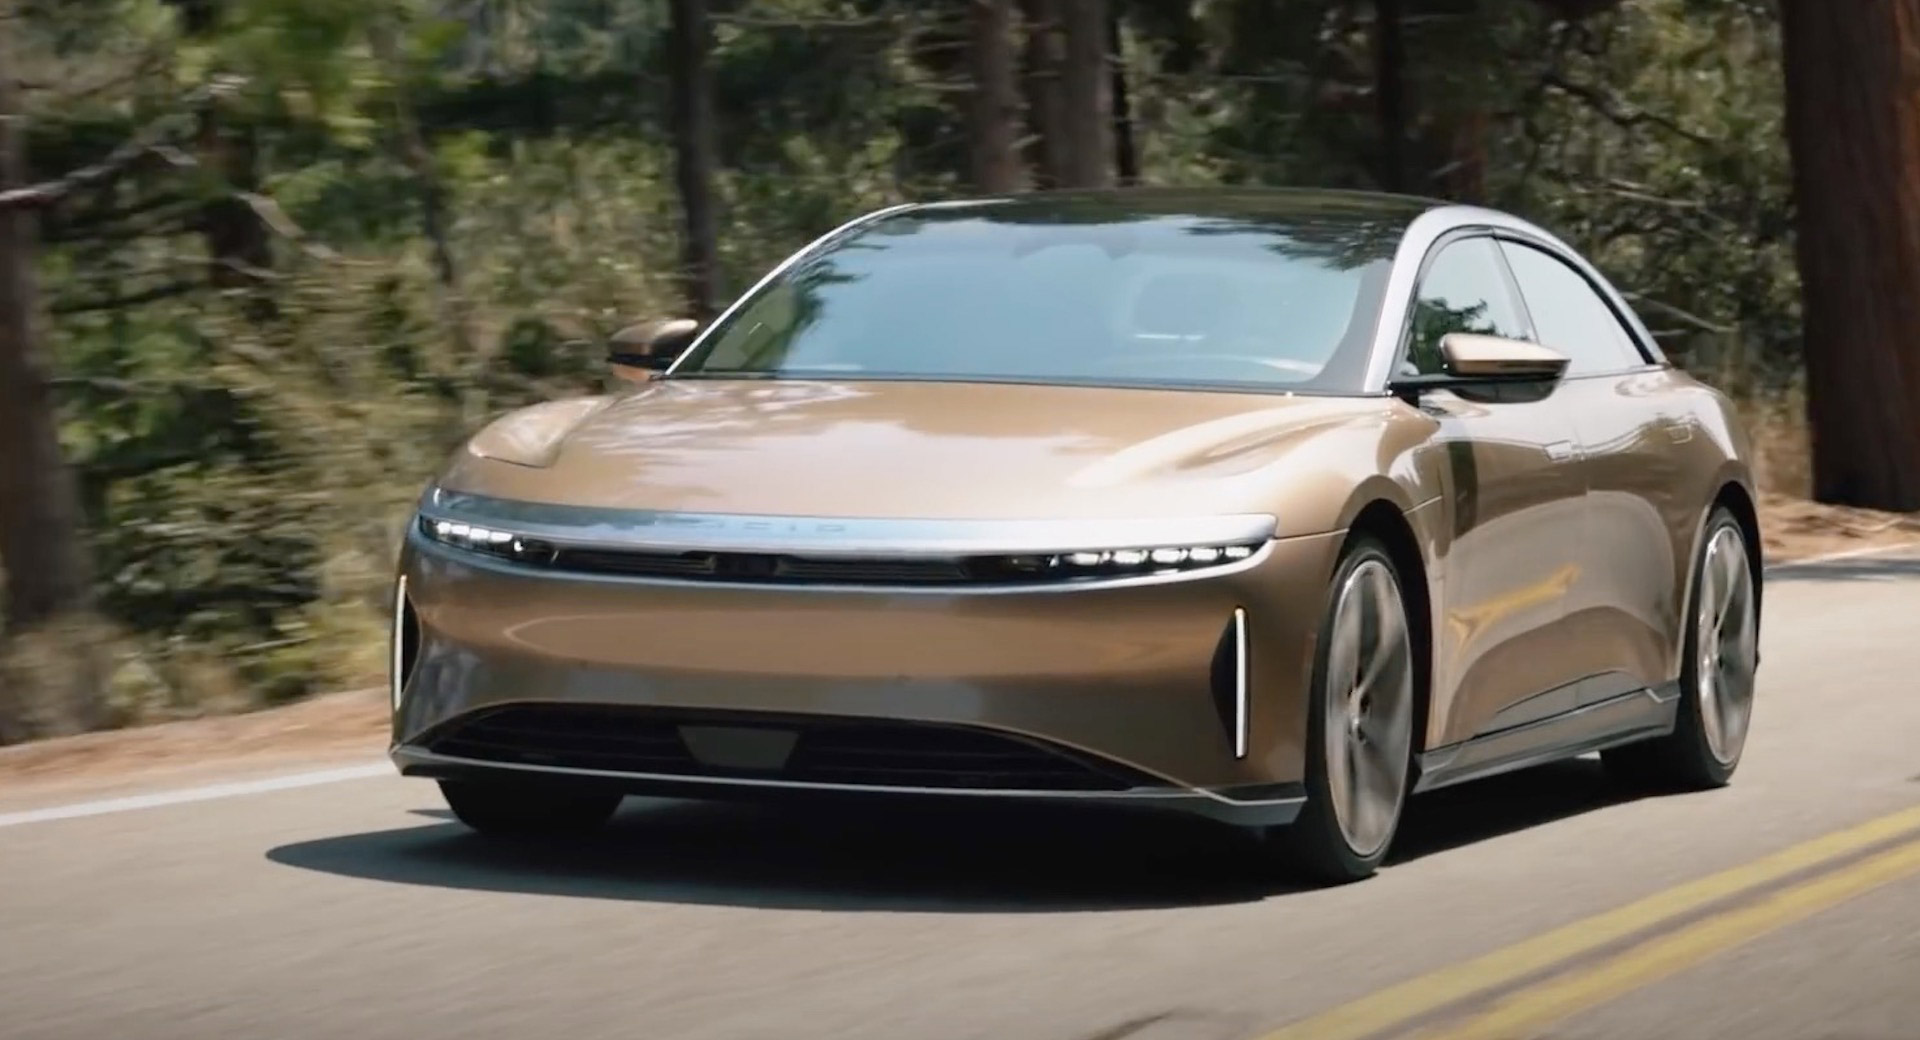 2022 Lucid Air quick drive review: High quality, high hopes - CNET